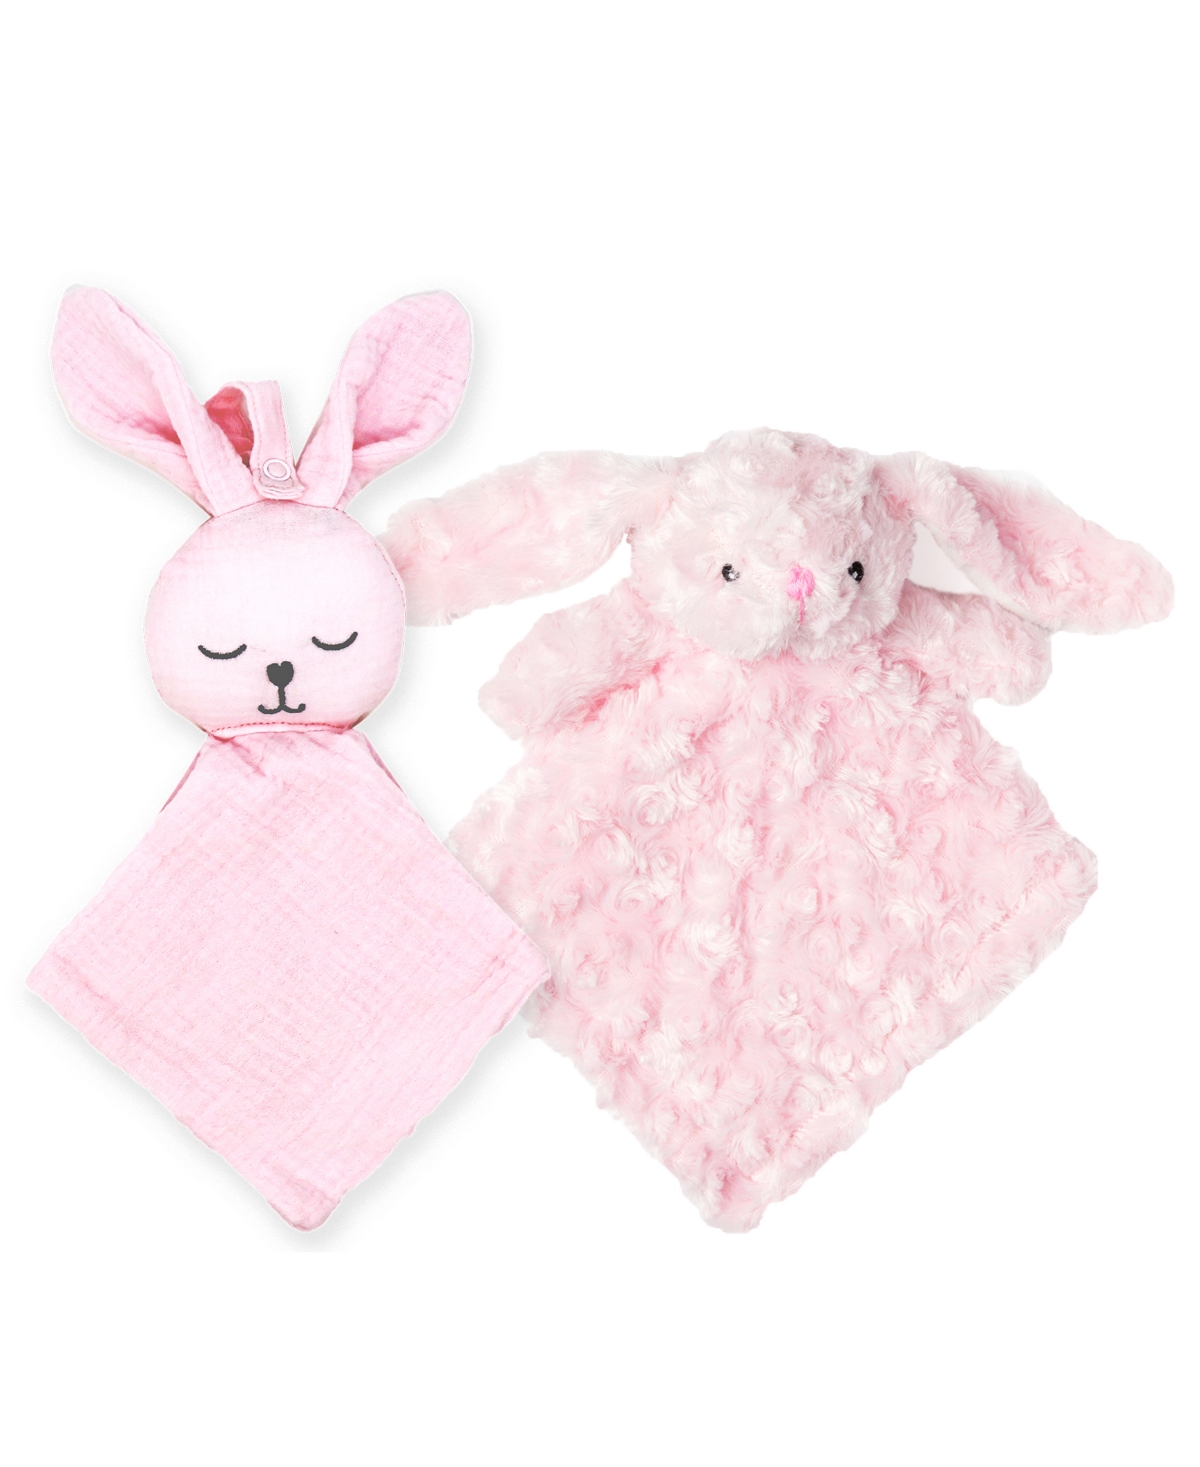 Tendertyme Baby Girls Pacifier Keeper And Bunny Plush, 2 Piece Set In Pink